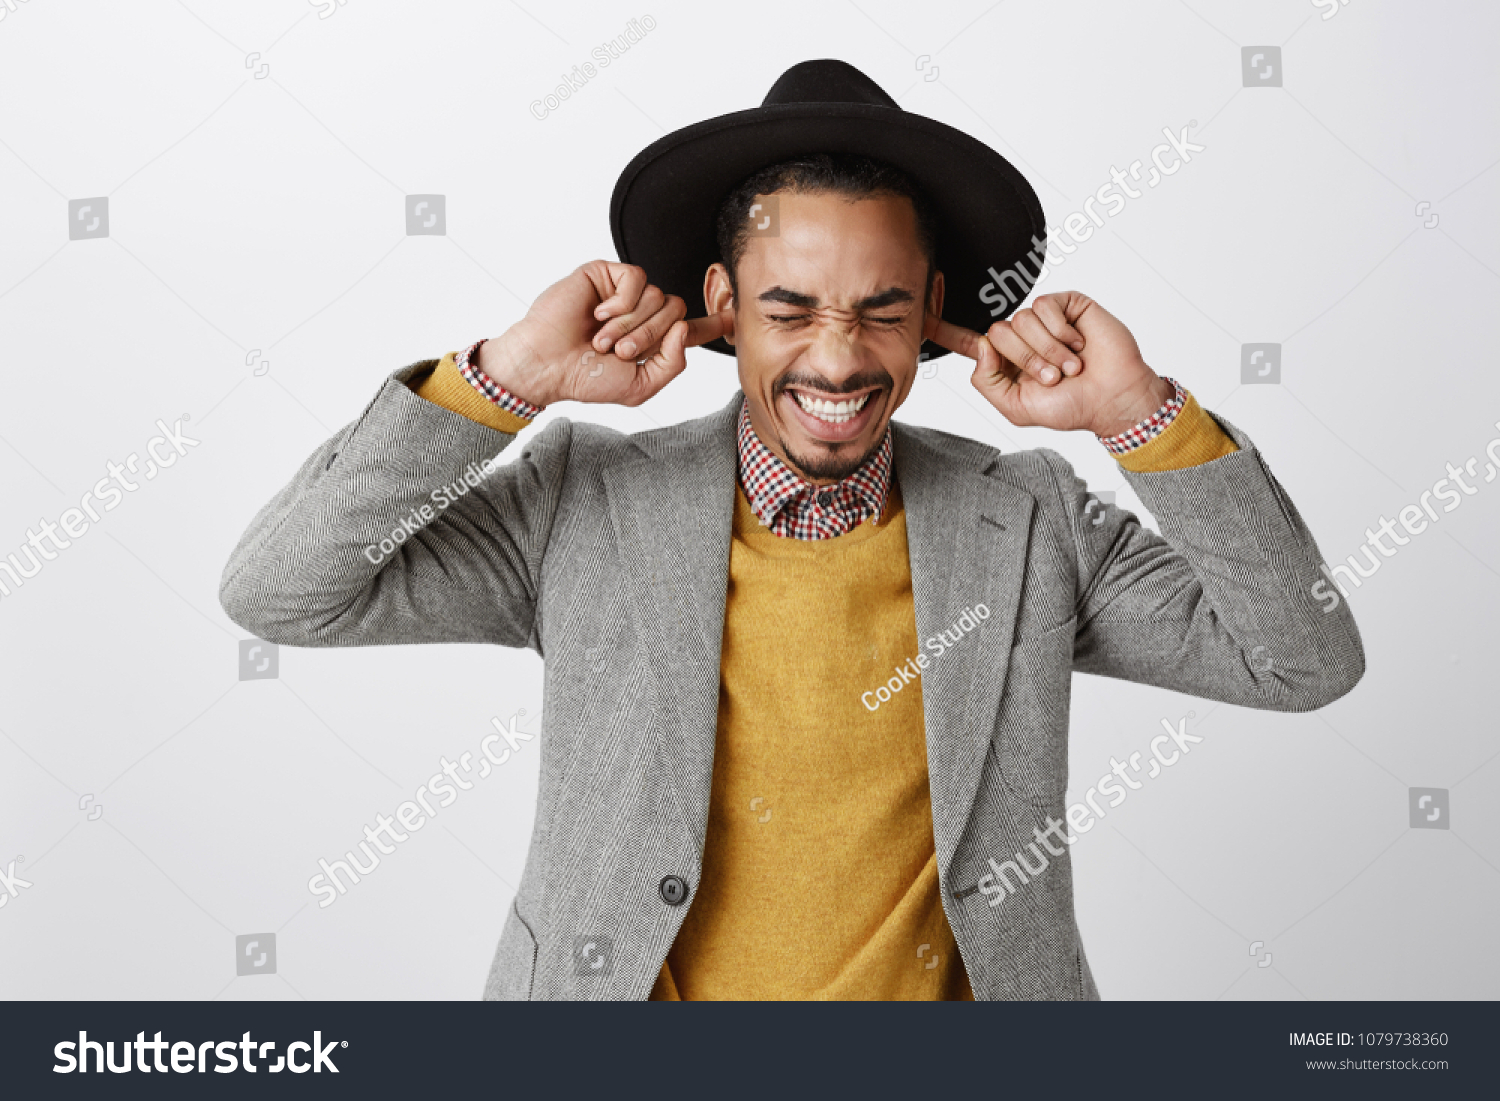 Using natural earplugs not to hear spoilers. Good-looking happy dark-skinned guy in classy hat and stylish outfit smiling with closed eyes, holding index fingers in ears, waiting for surprise #1079738360